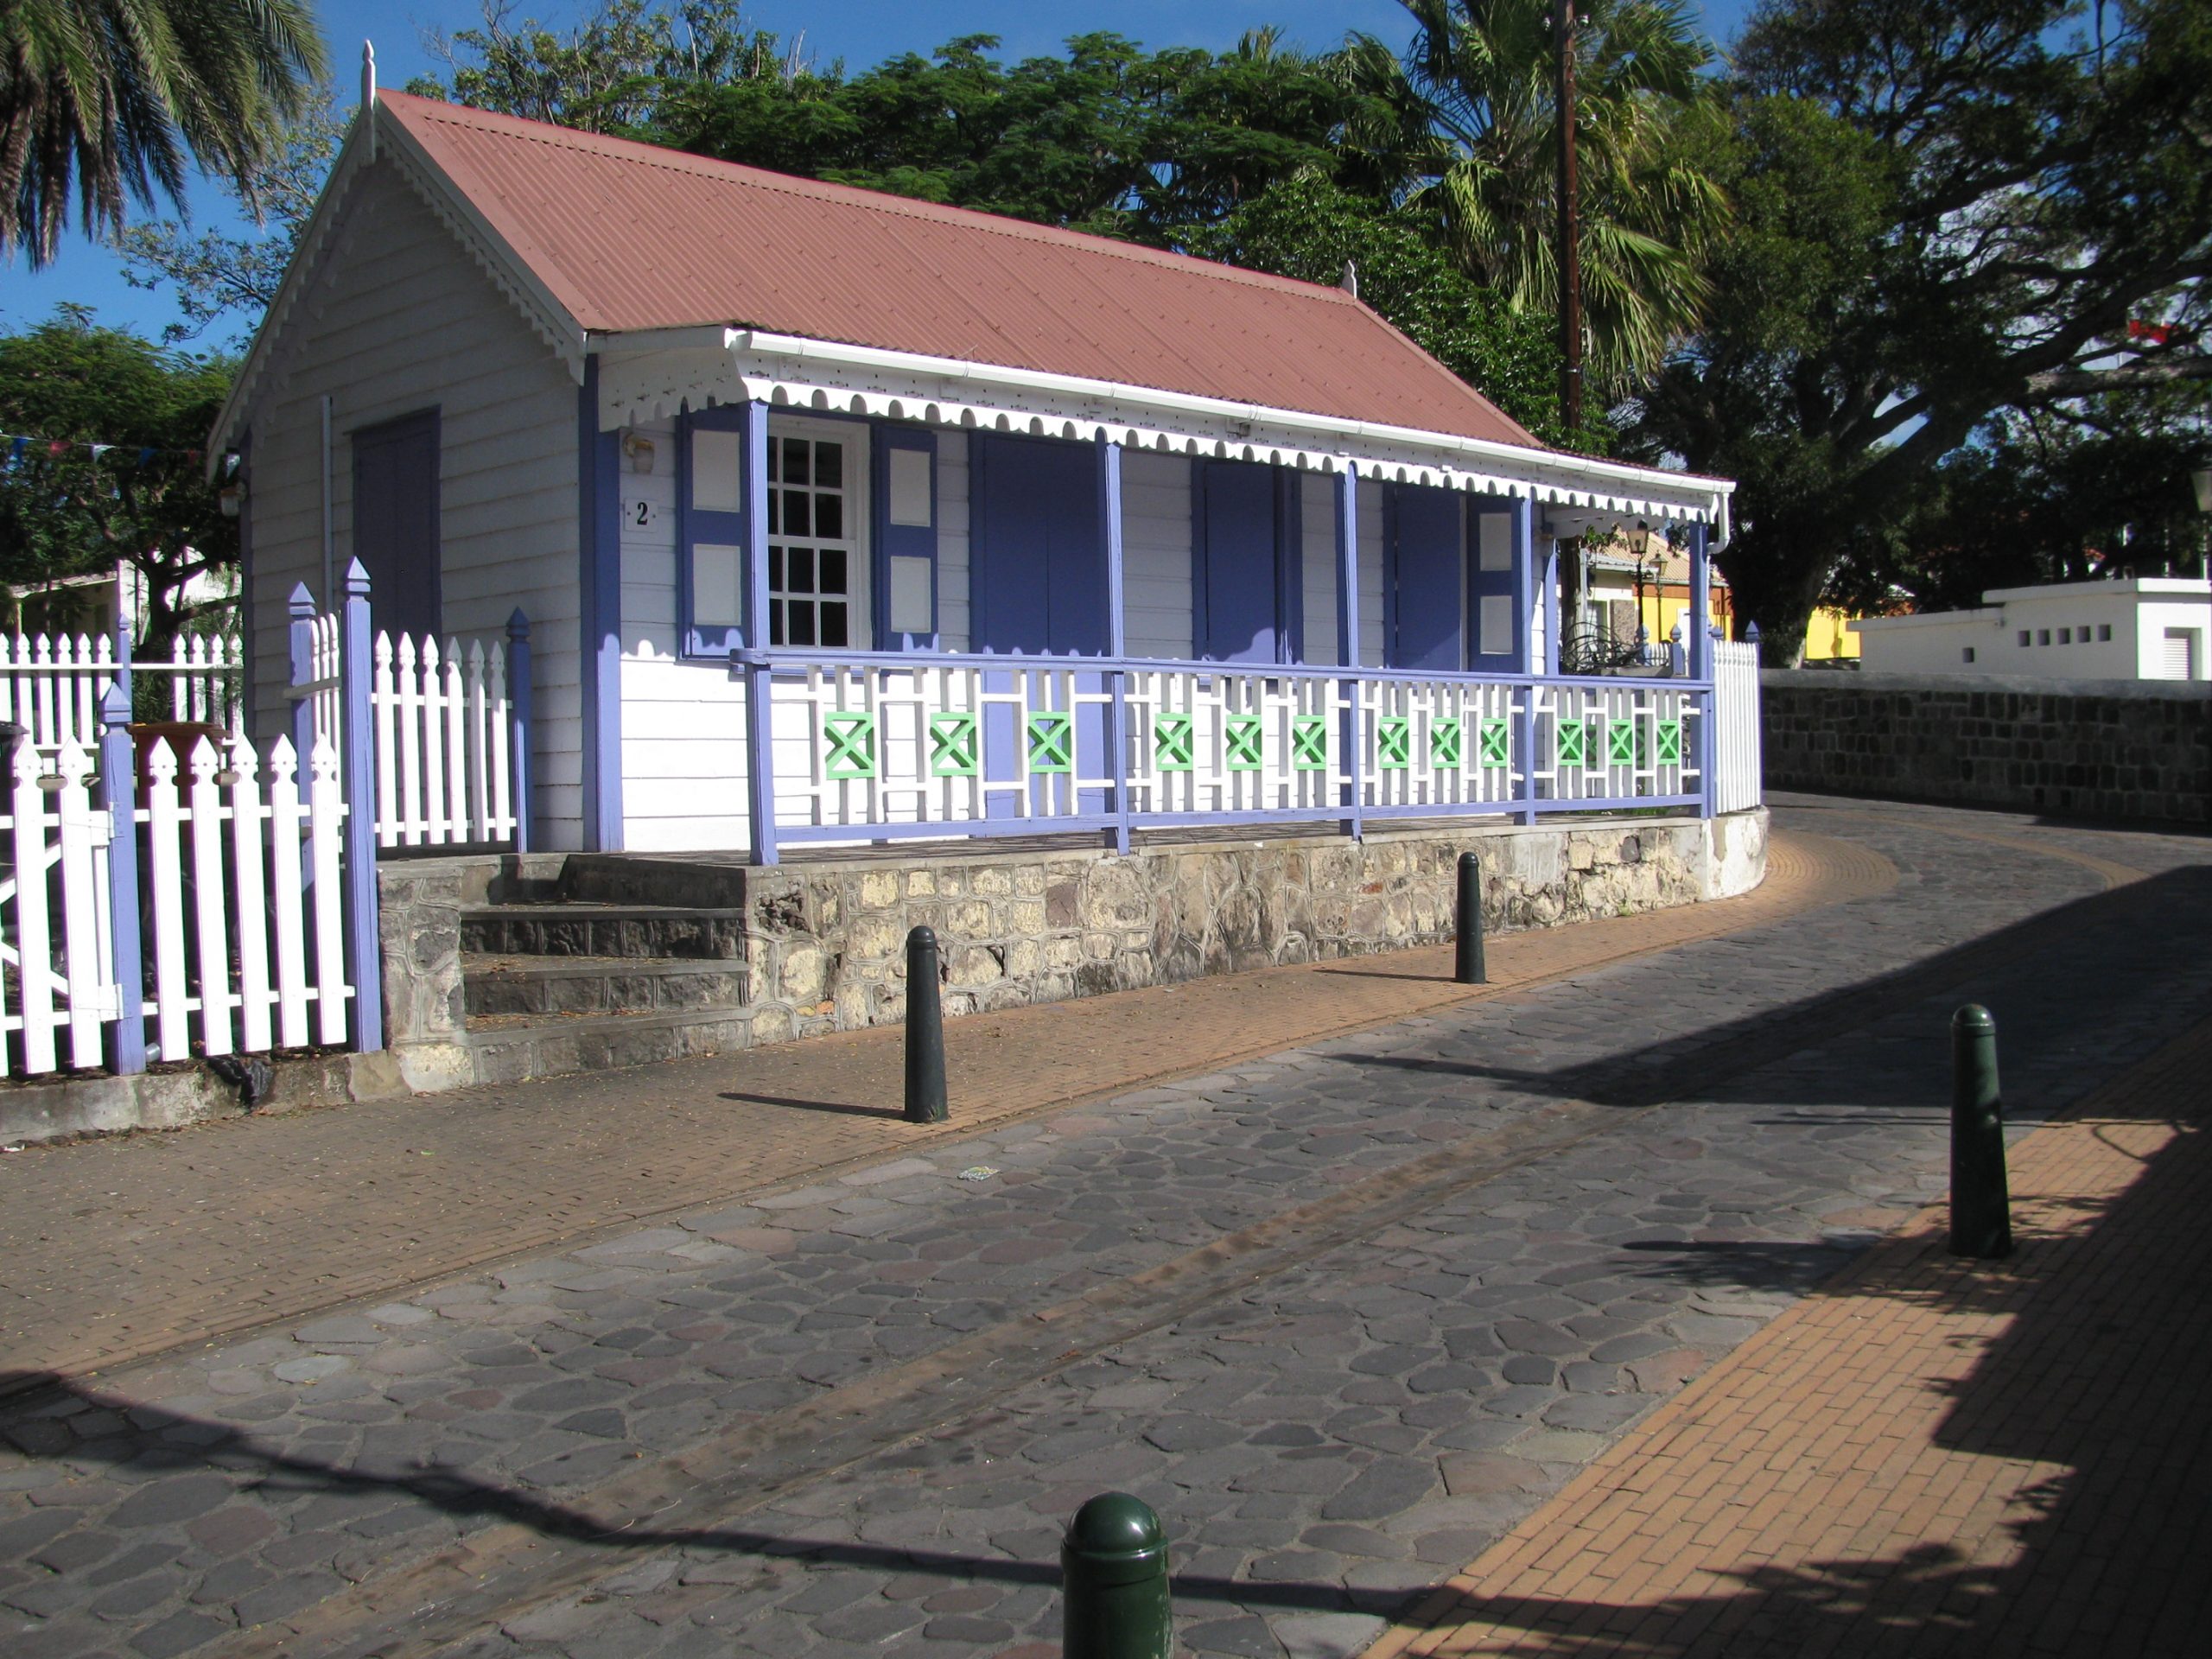 St. Eustatius will Open to Tourists on August 2nd